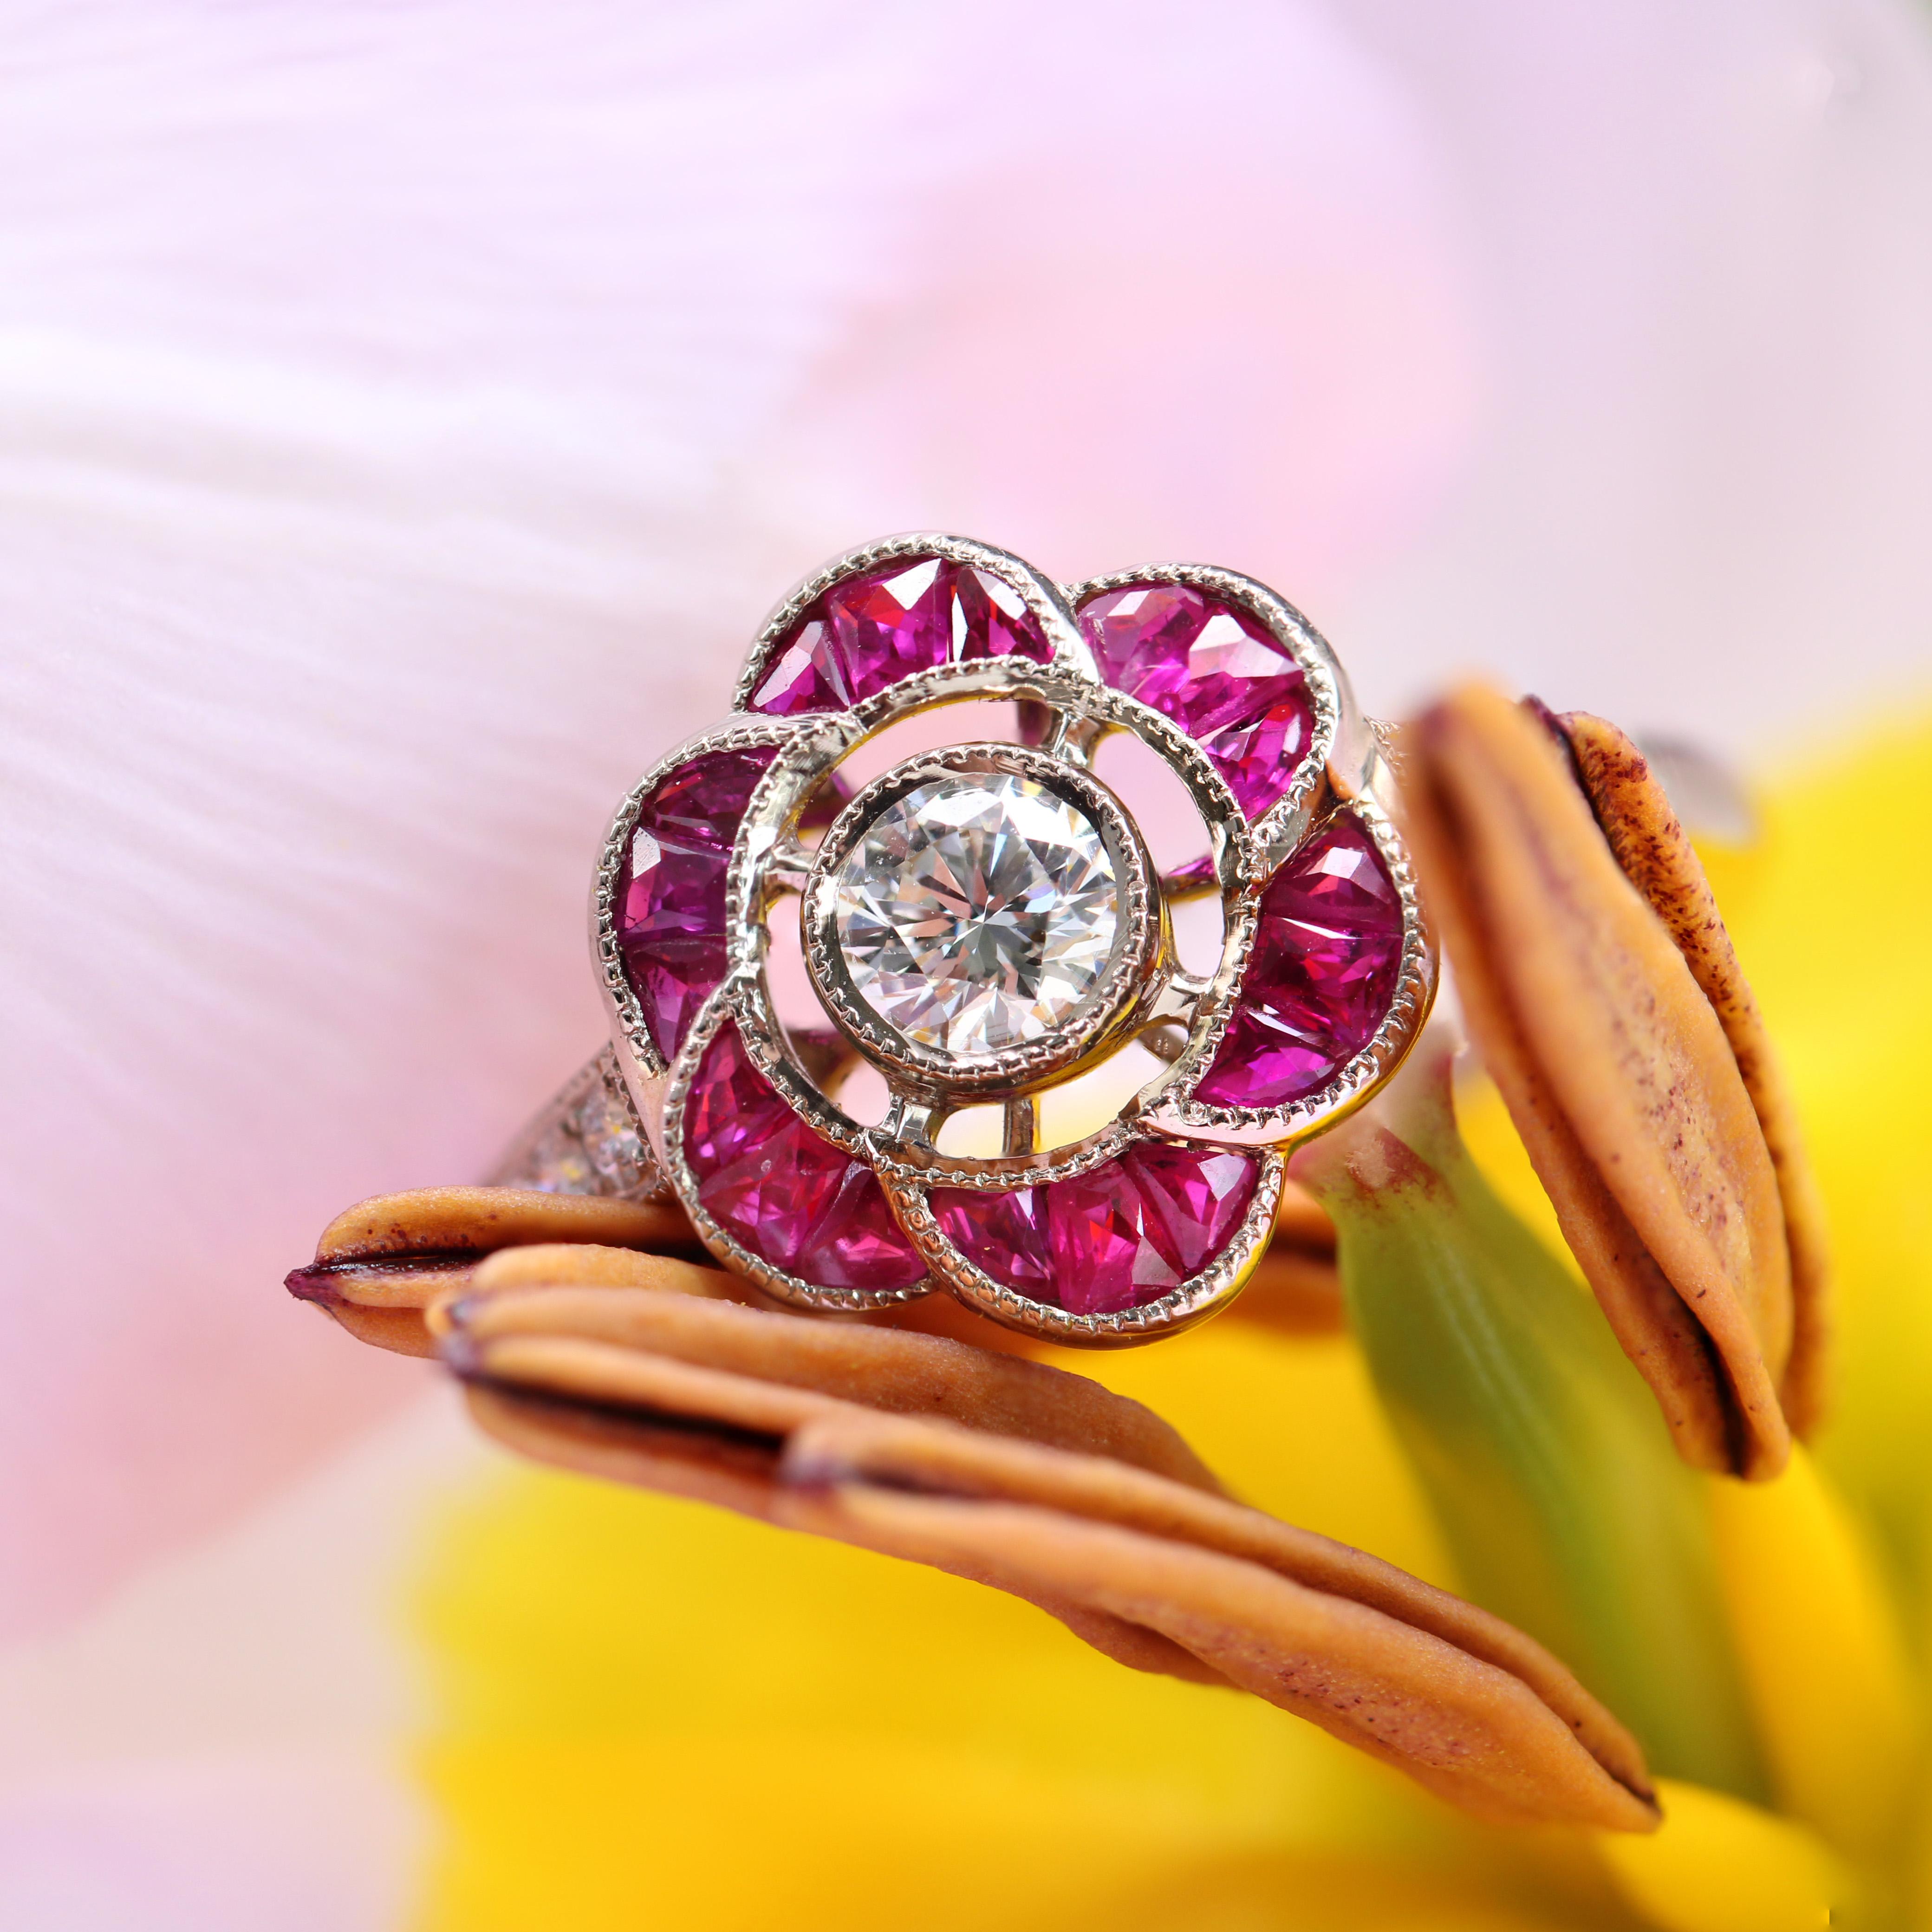 Brilliant Cut New Art Deco Style Calibrated Rubies Diamonds 18 Karat White Gold Flower Ring For Sale